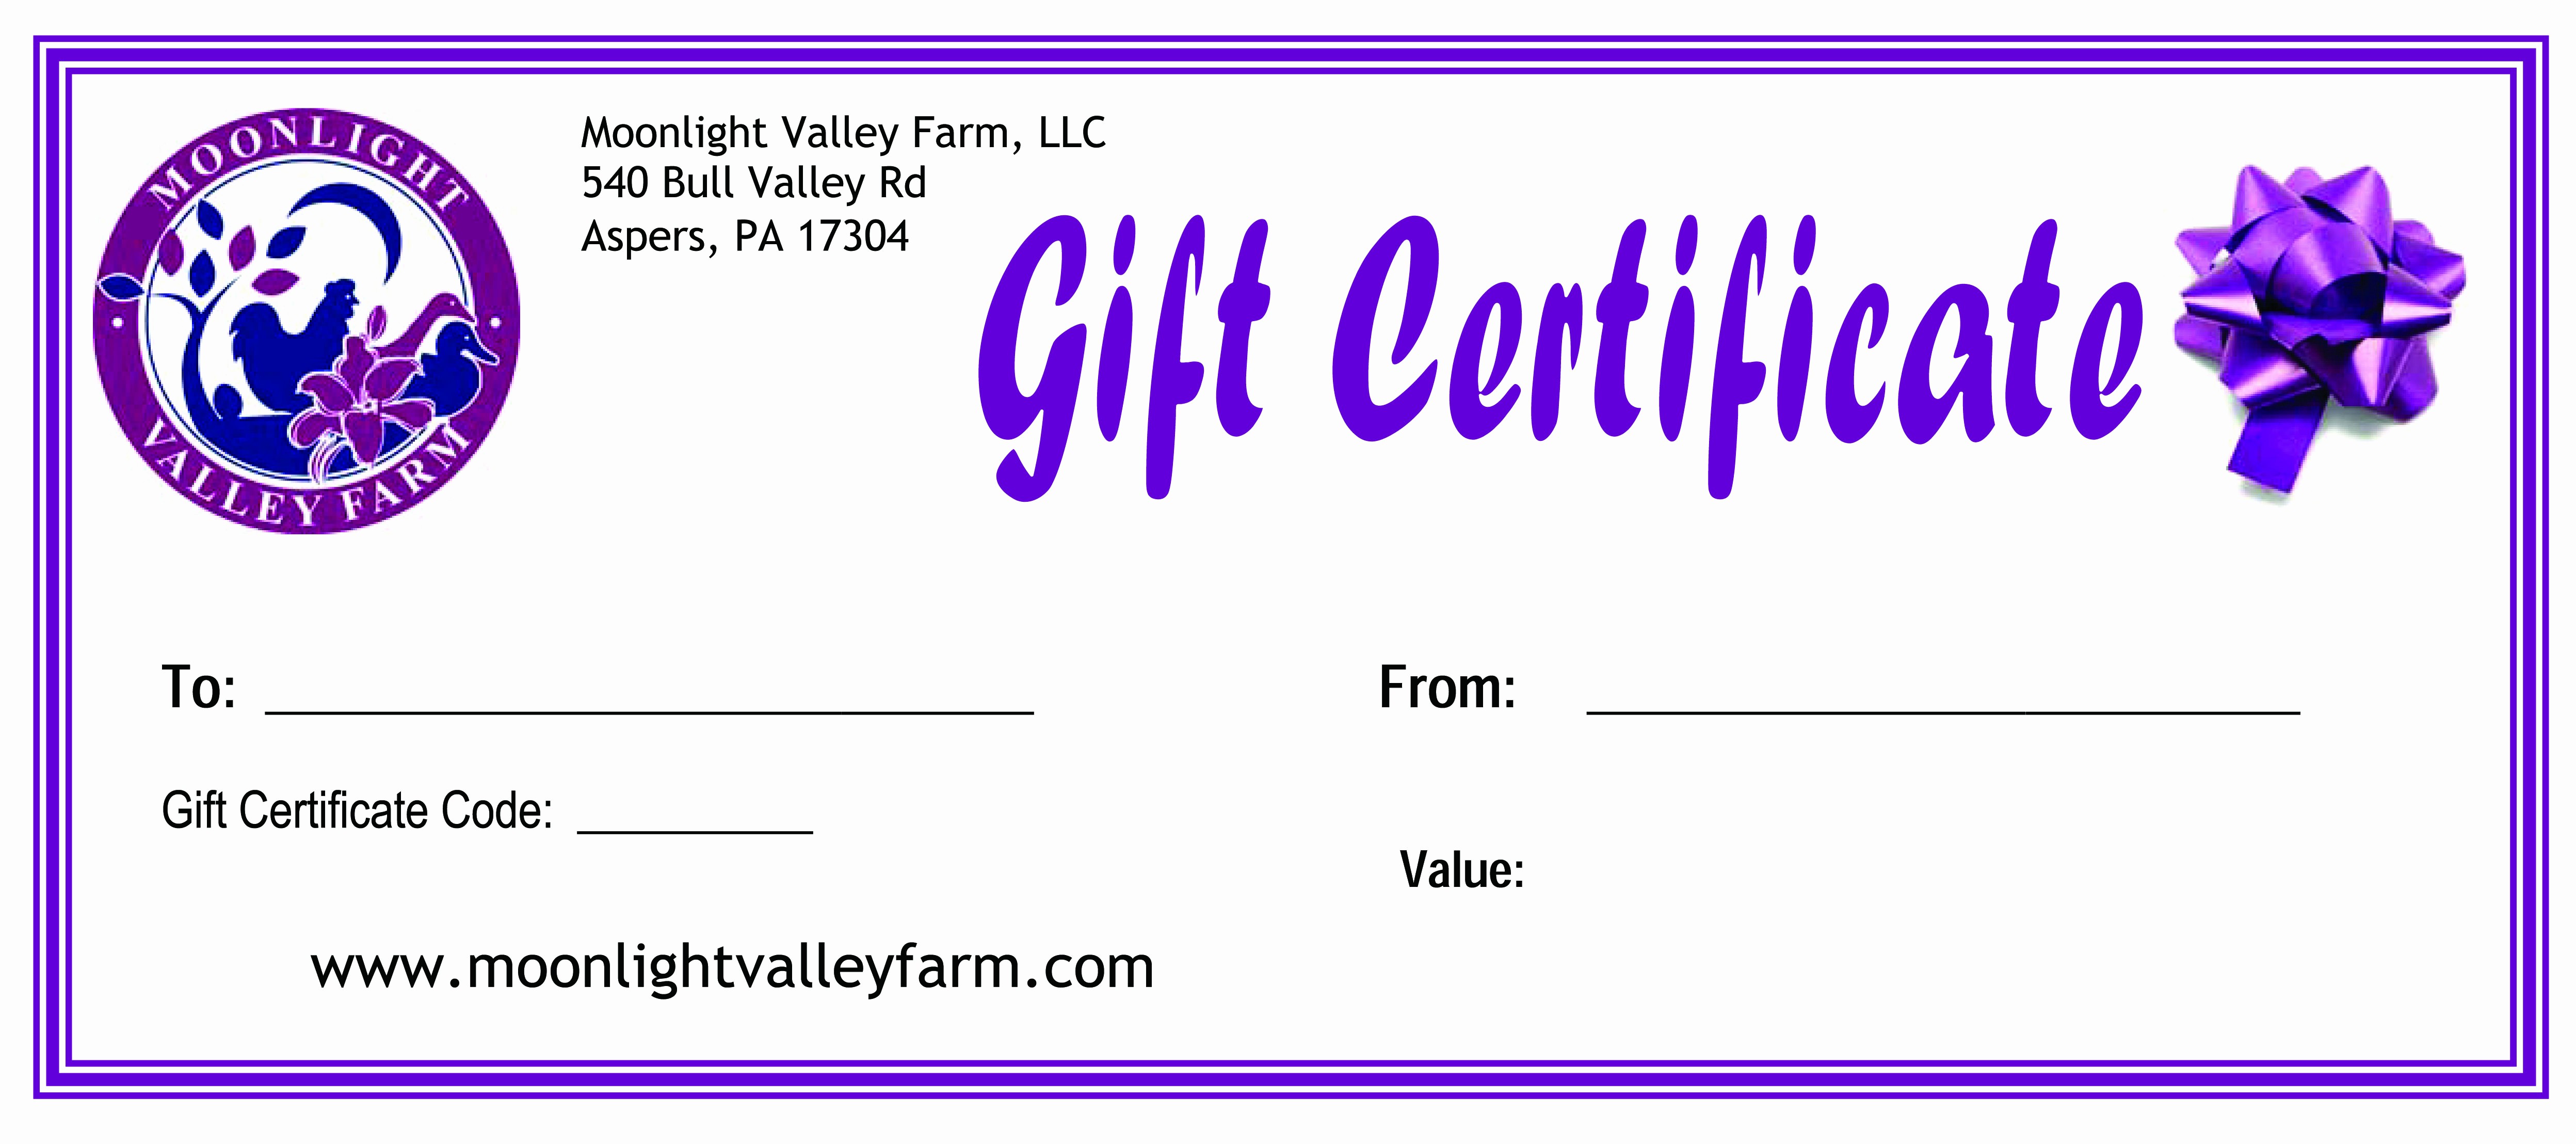 How to Make Gift Certificates Unique $25 Gift Certificate [gift 25] $25 00